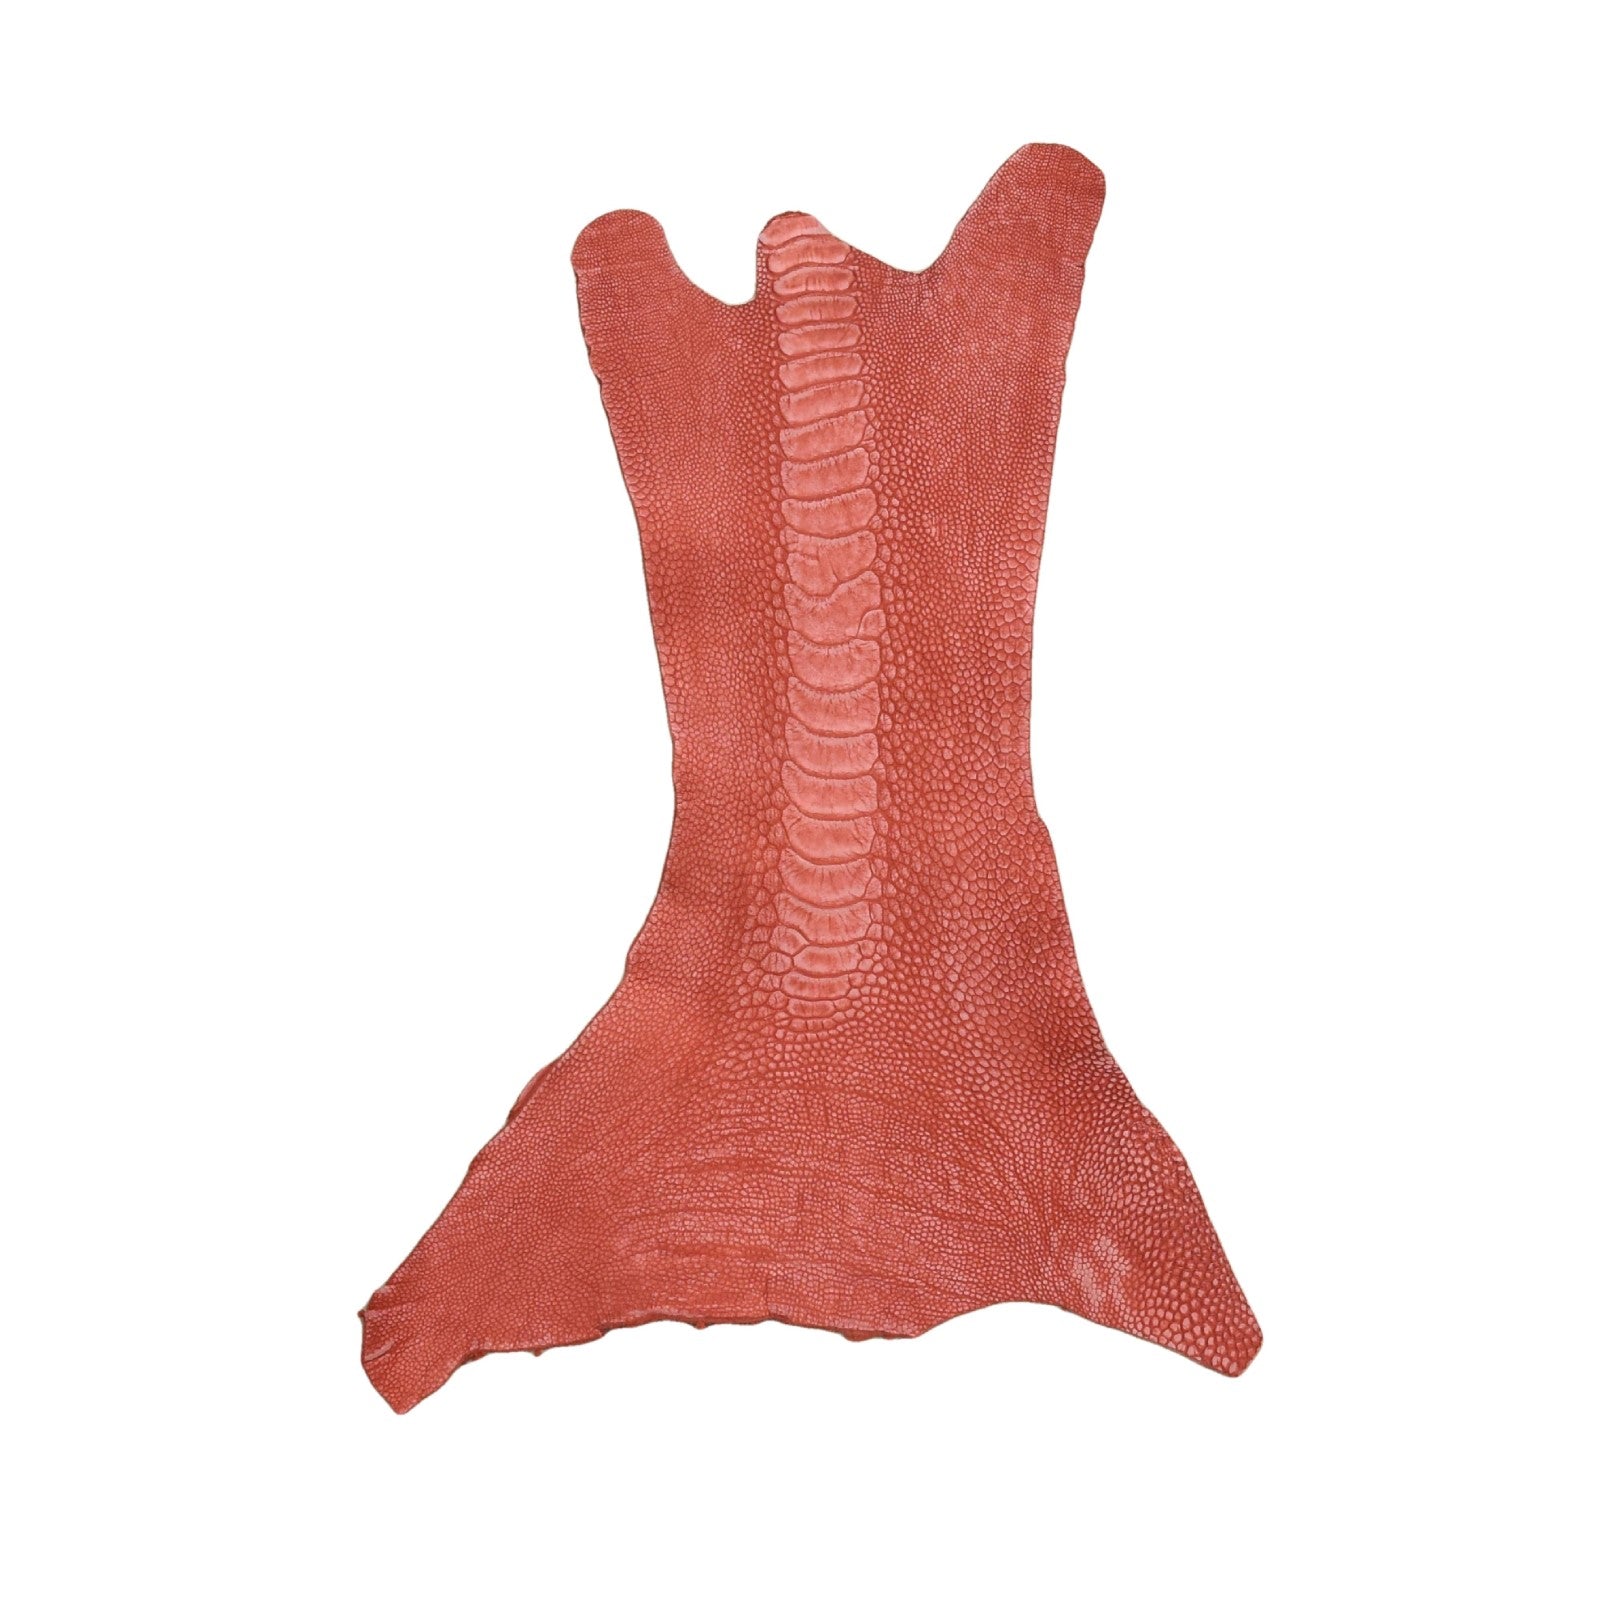 Ostrich Leg Skins, 12"-16", 2-3 oz, Stonewashed, Rose Petal Red | The Leather Guy